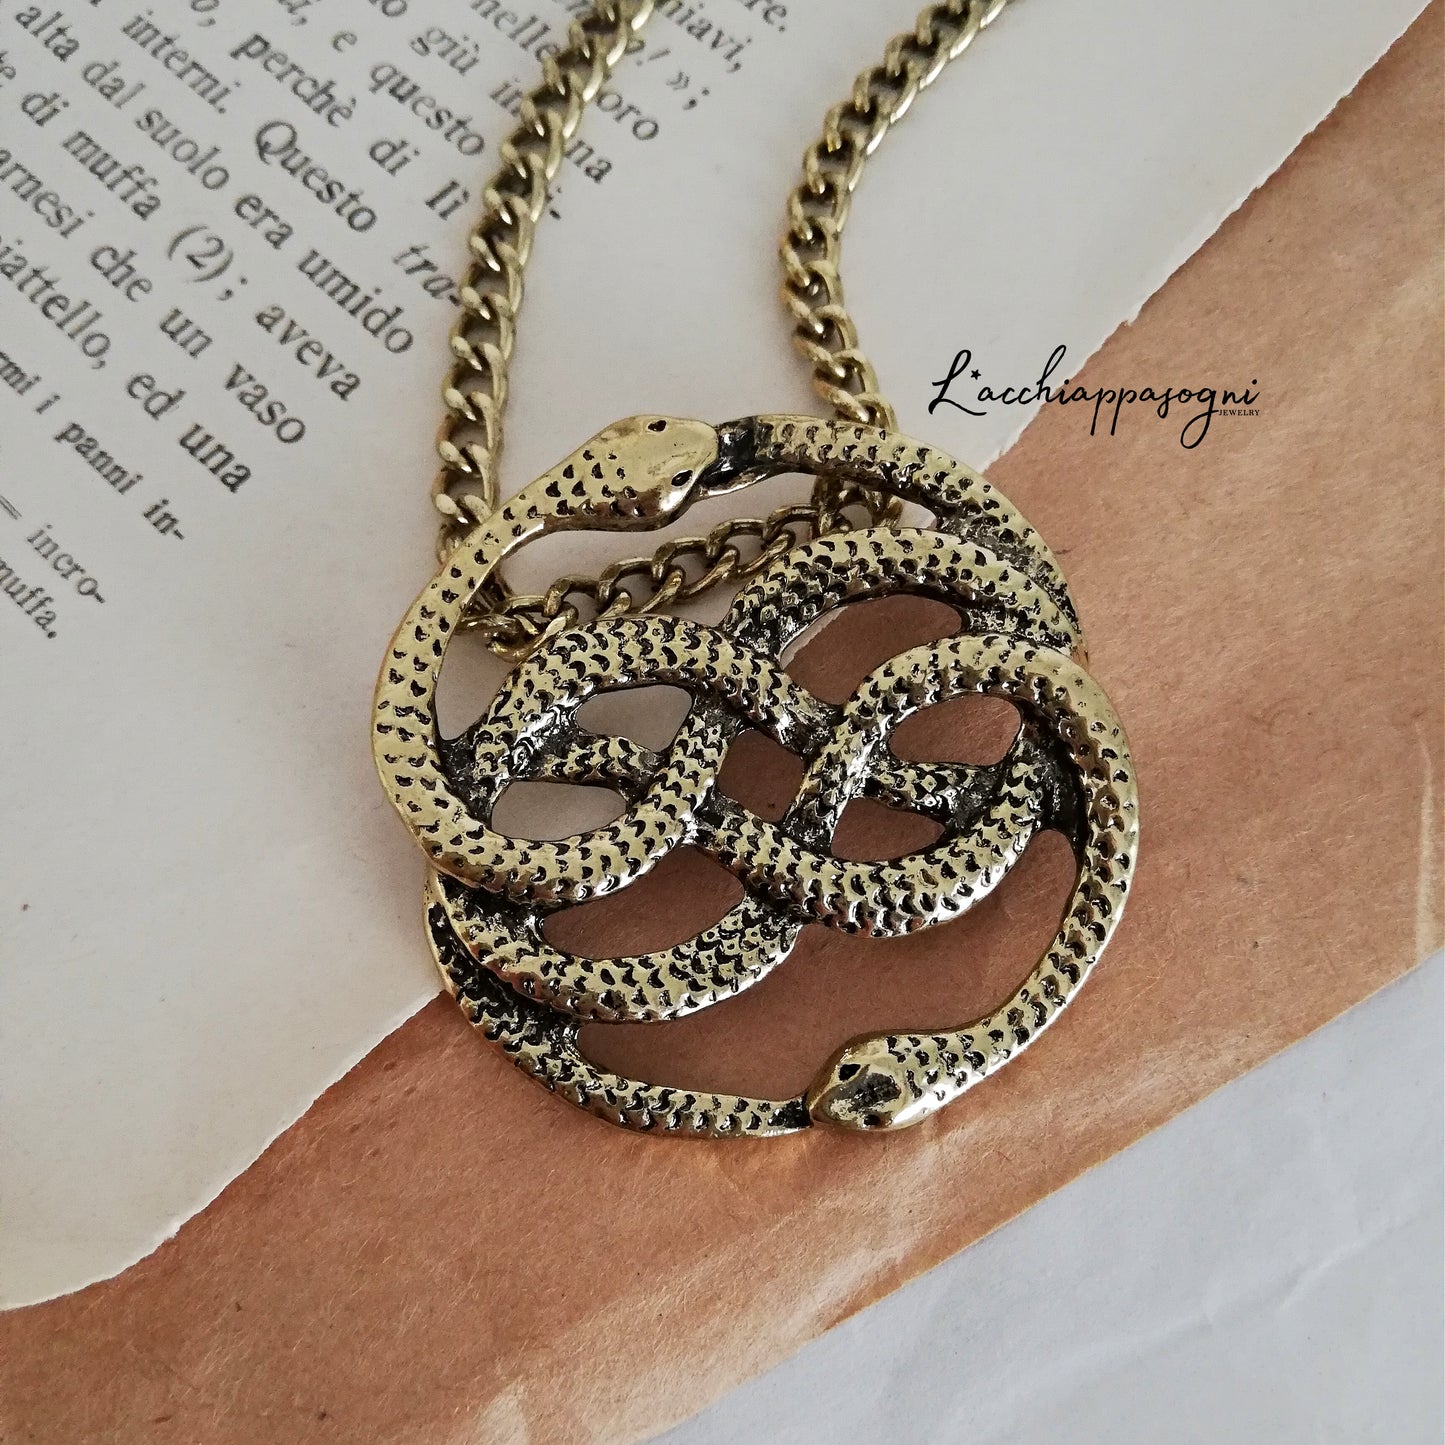 Neverending Story Auryn Necklace